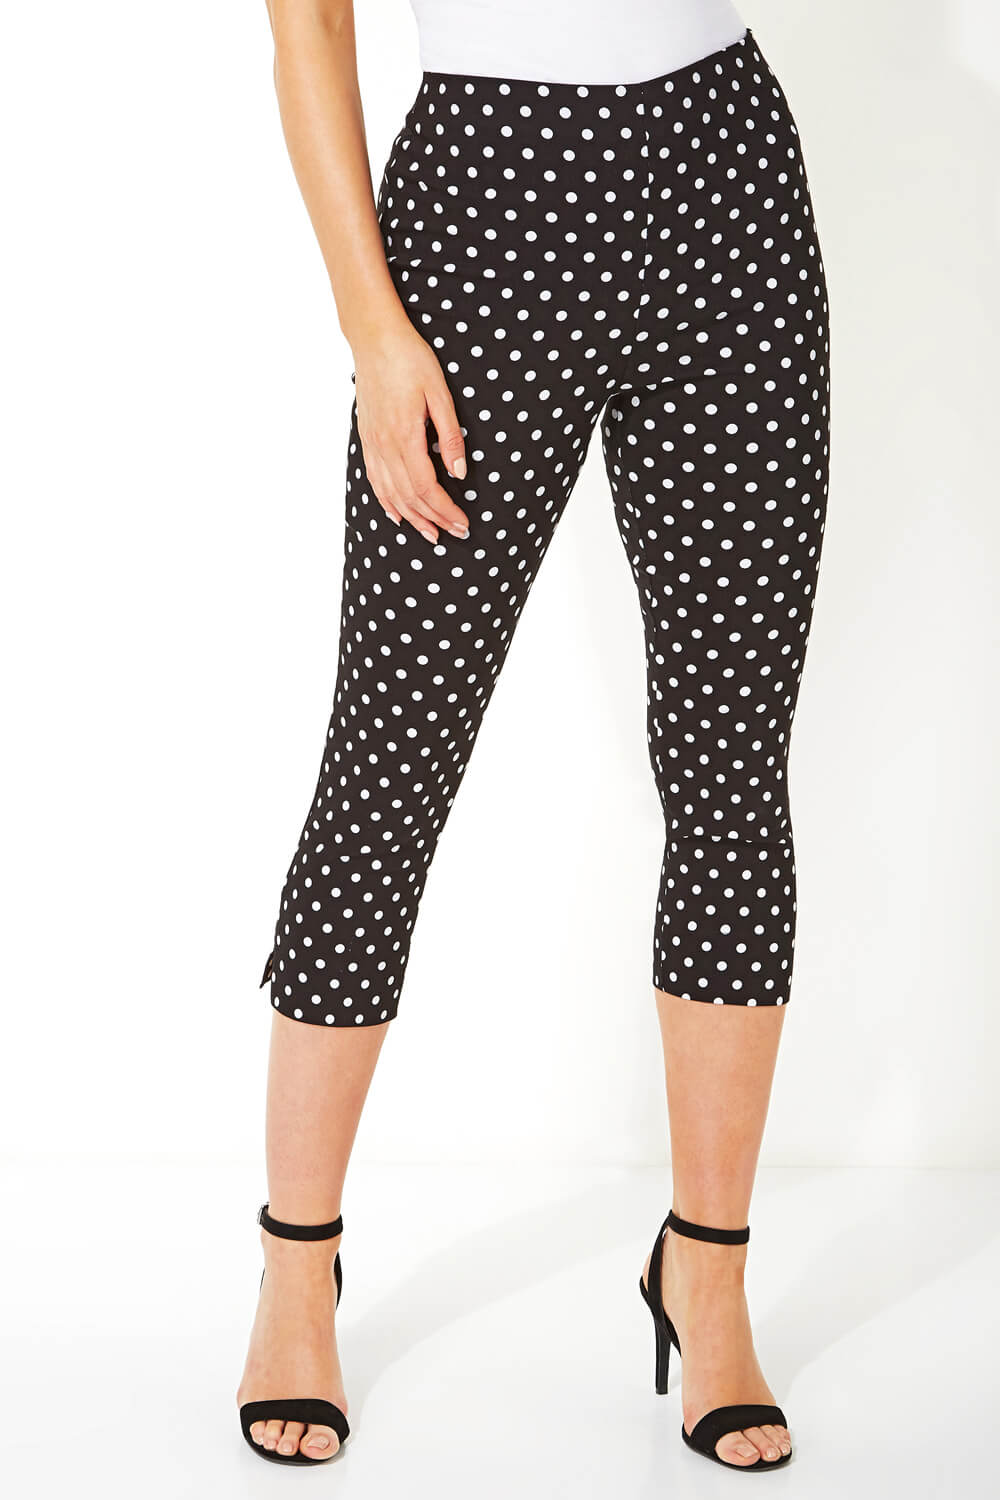 Black Spot Cropped Stretch Trousers, Image 2 of 5